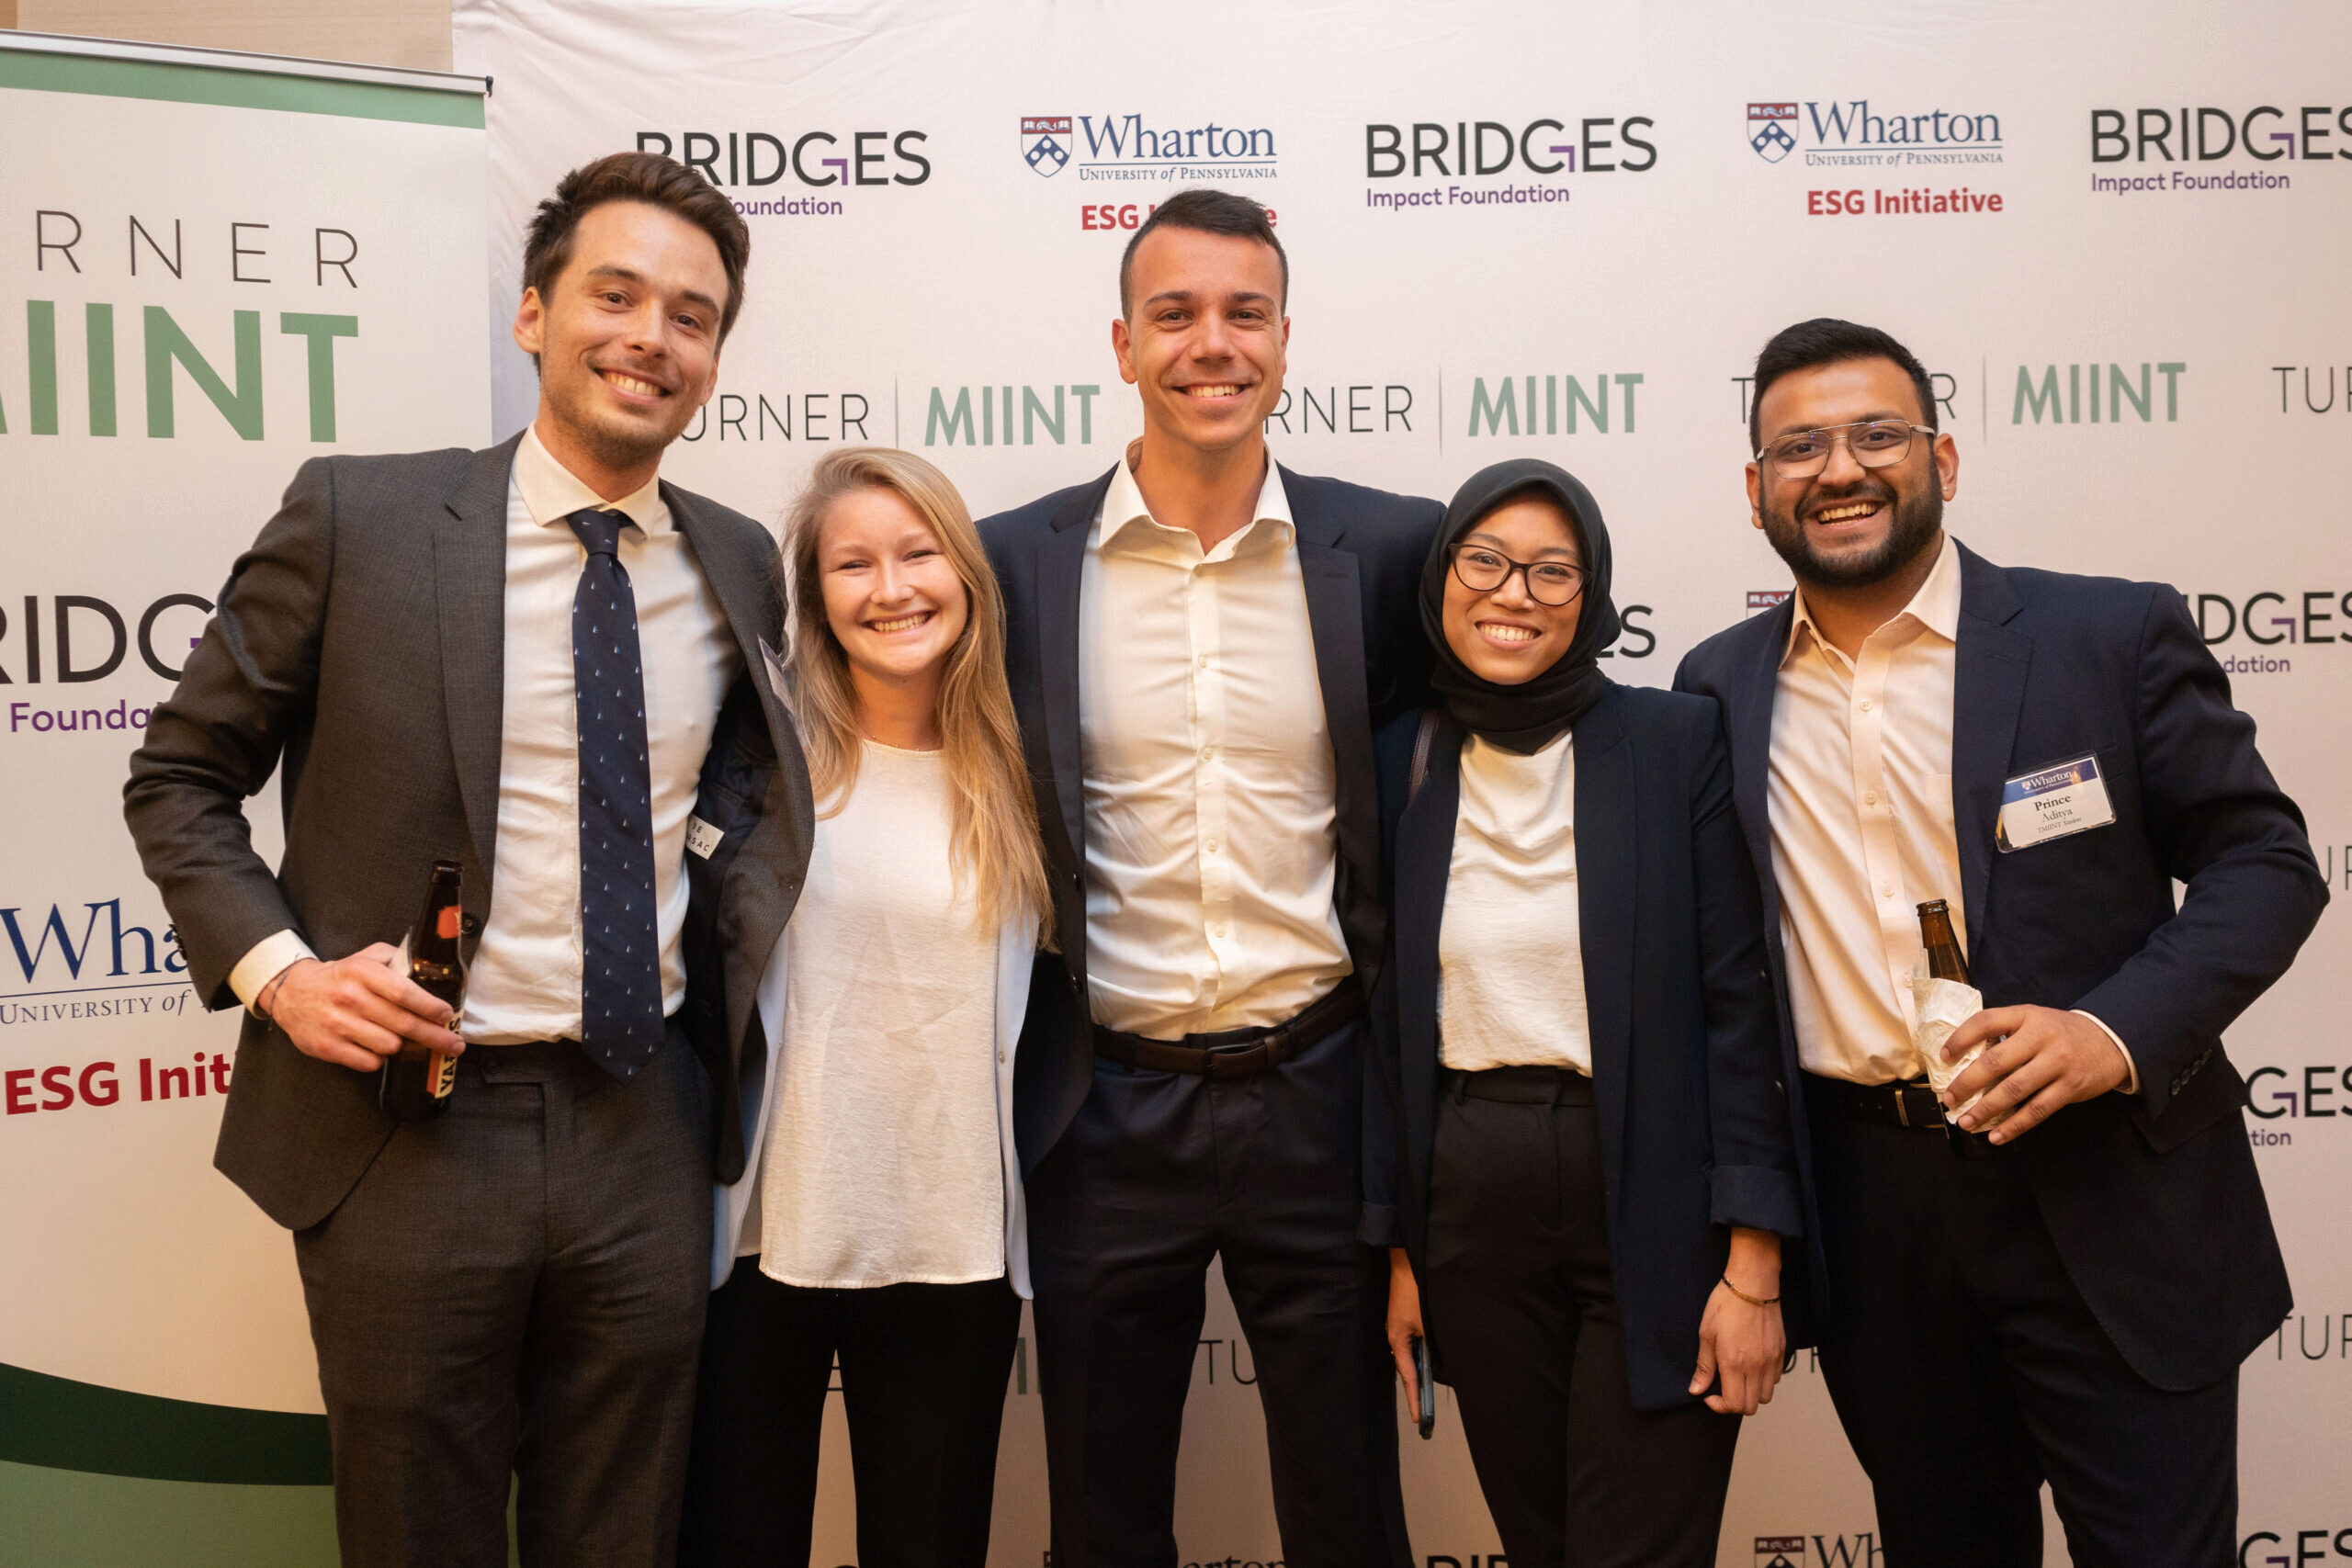 TMIINT finalists posing in front of a banner that says Wharton ESG Initiatives, Bridges Impact Foundation, and Turner MIINT.